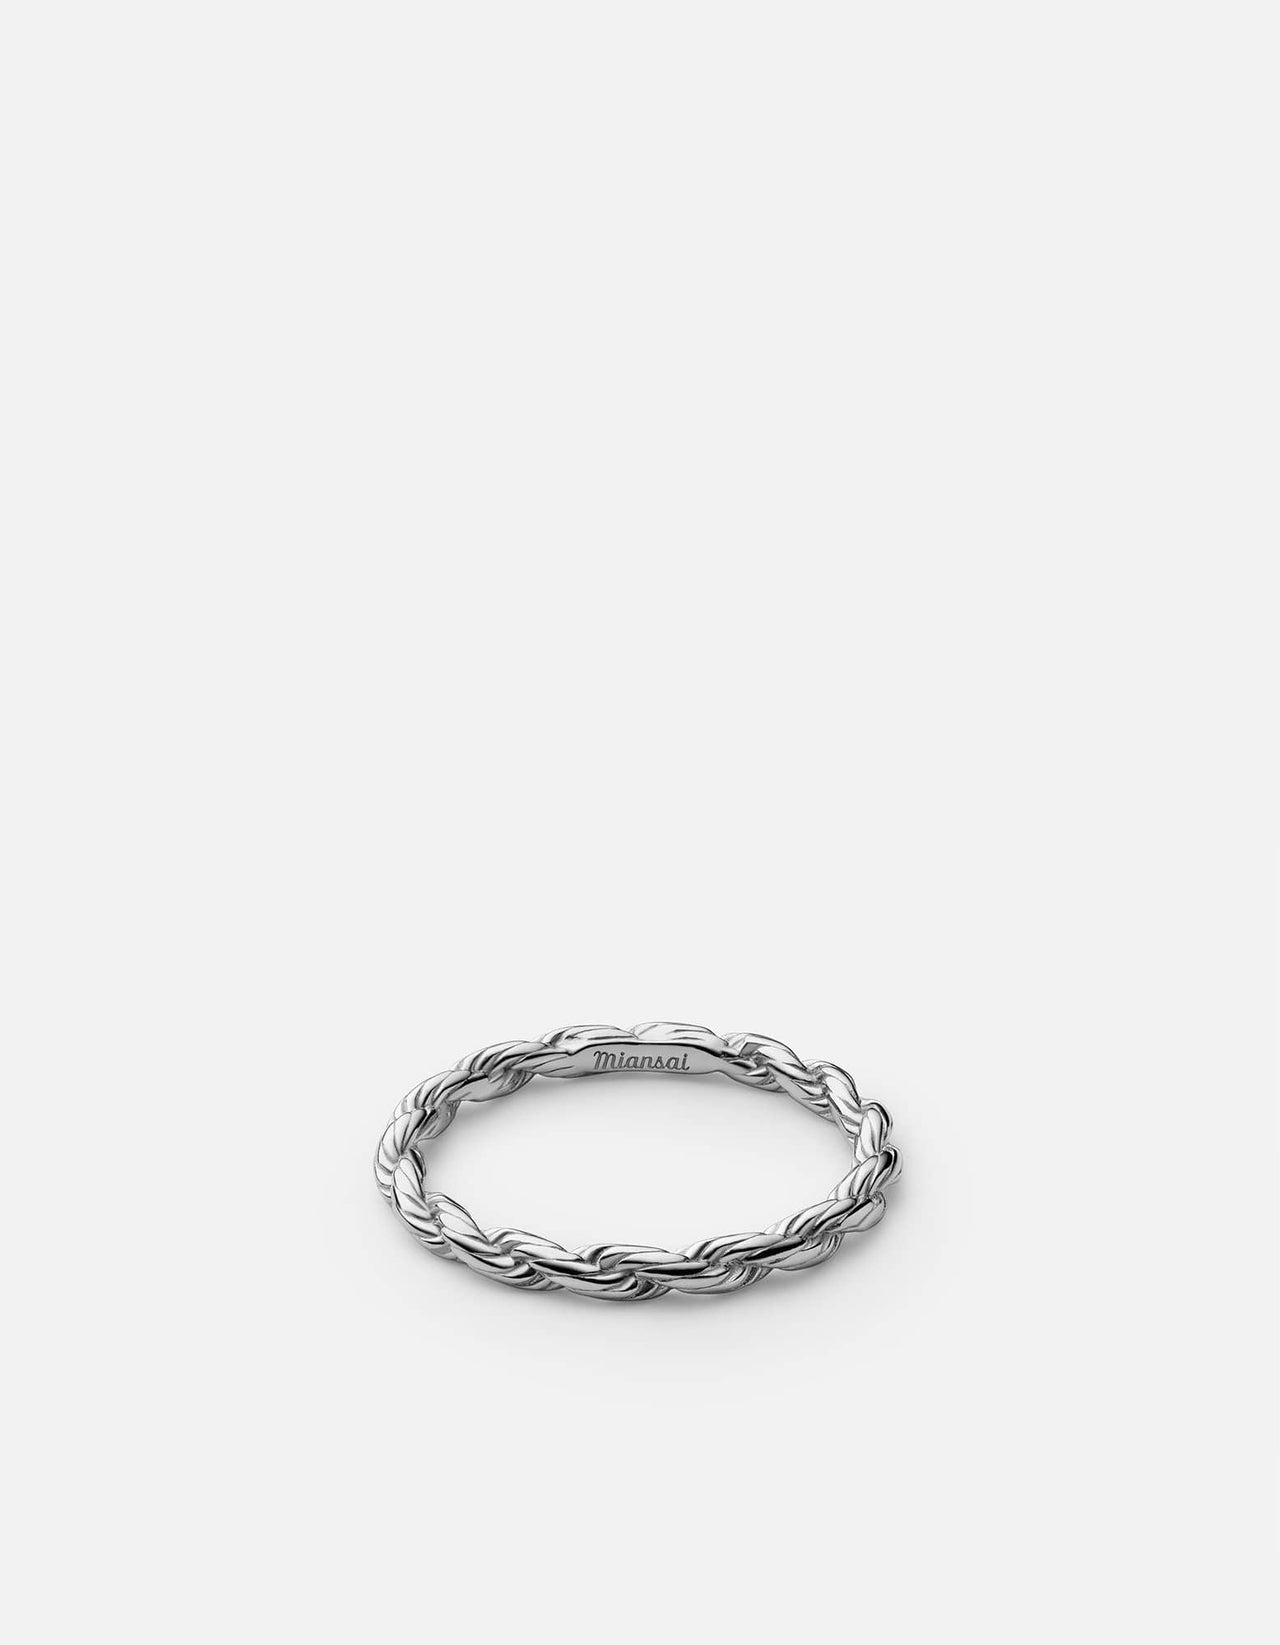 Miansai Men's Rope Chain Ring, Sterling Silver, Size 8